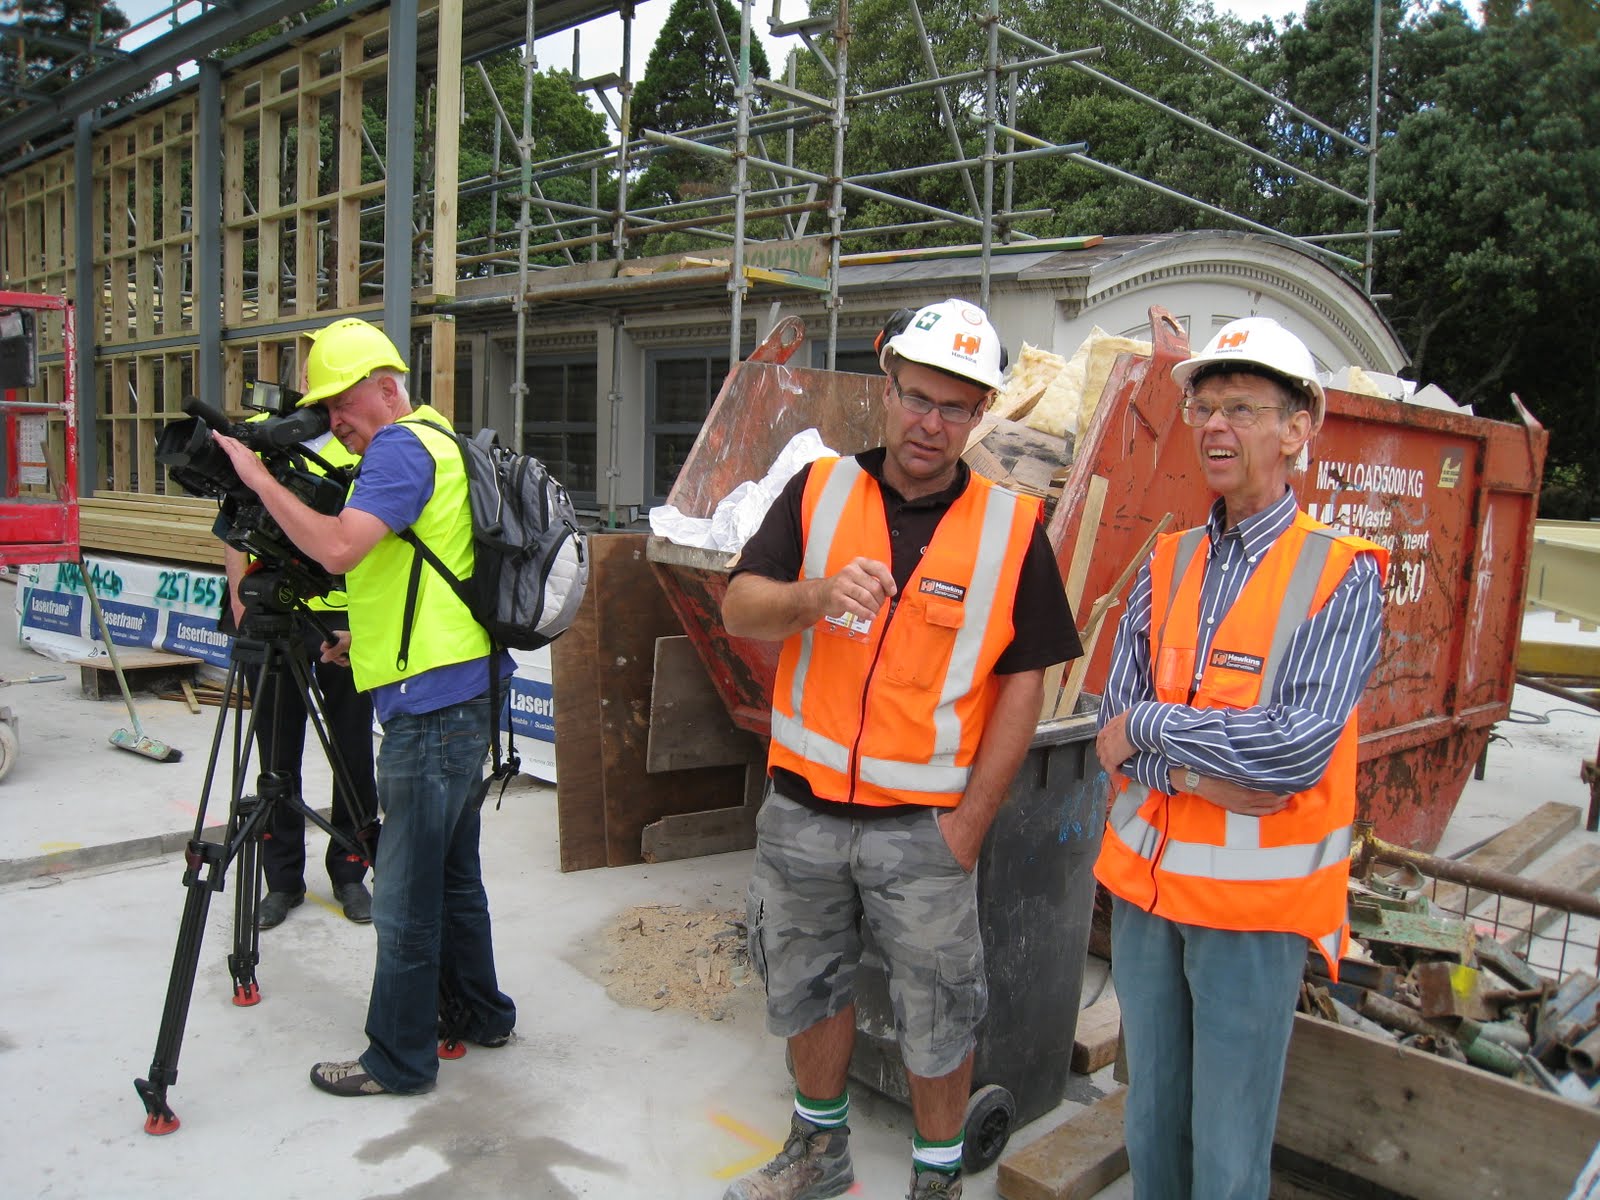 <p>Michael with the TVNZ crew and Lee from Hawkins who showed us round.</p>
